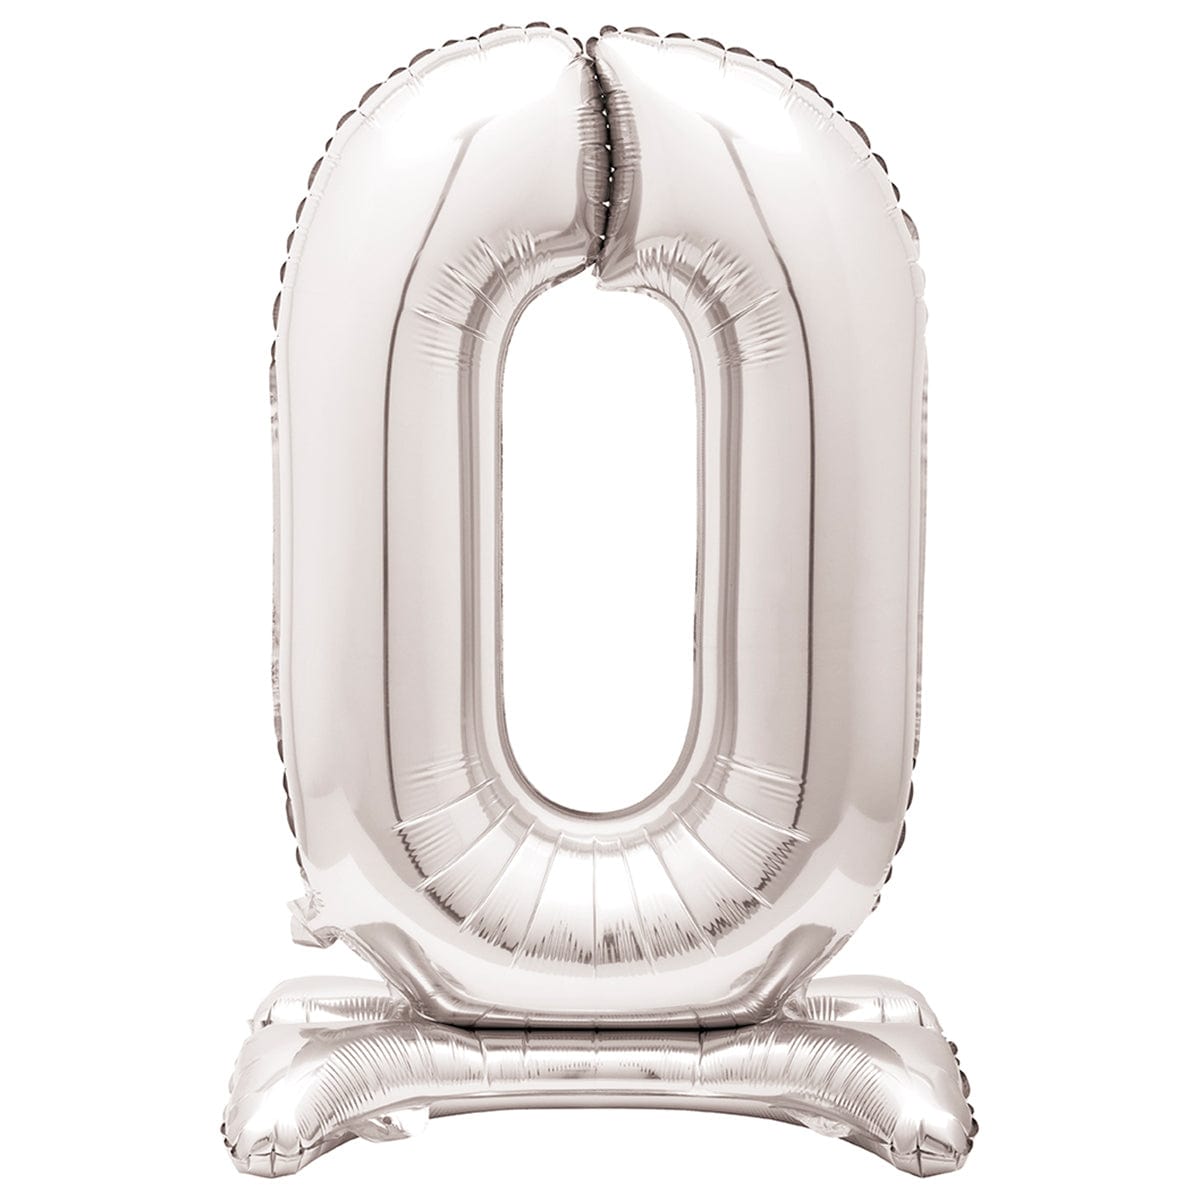 UNIQUE PARTY FAVORS Balloons Air-filled Standing Silver Number 0 Foil Balloon, 34 inches